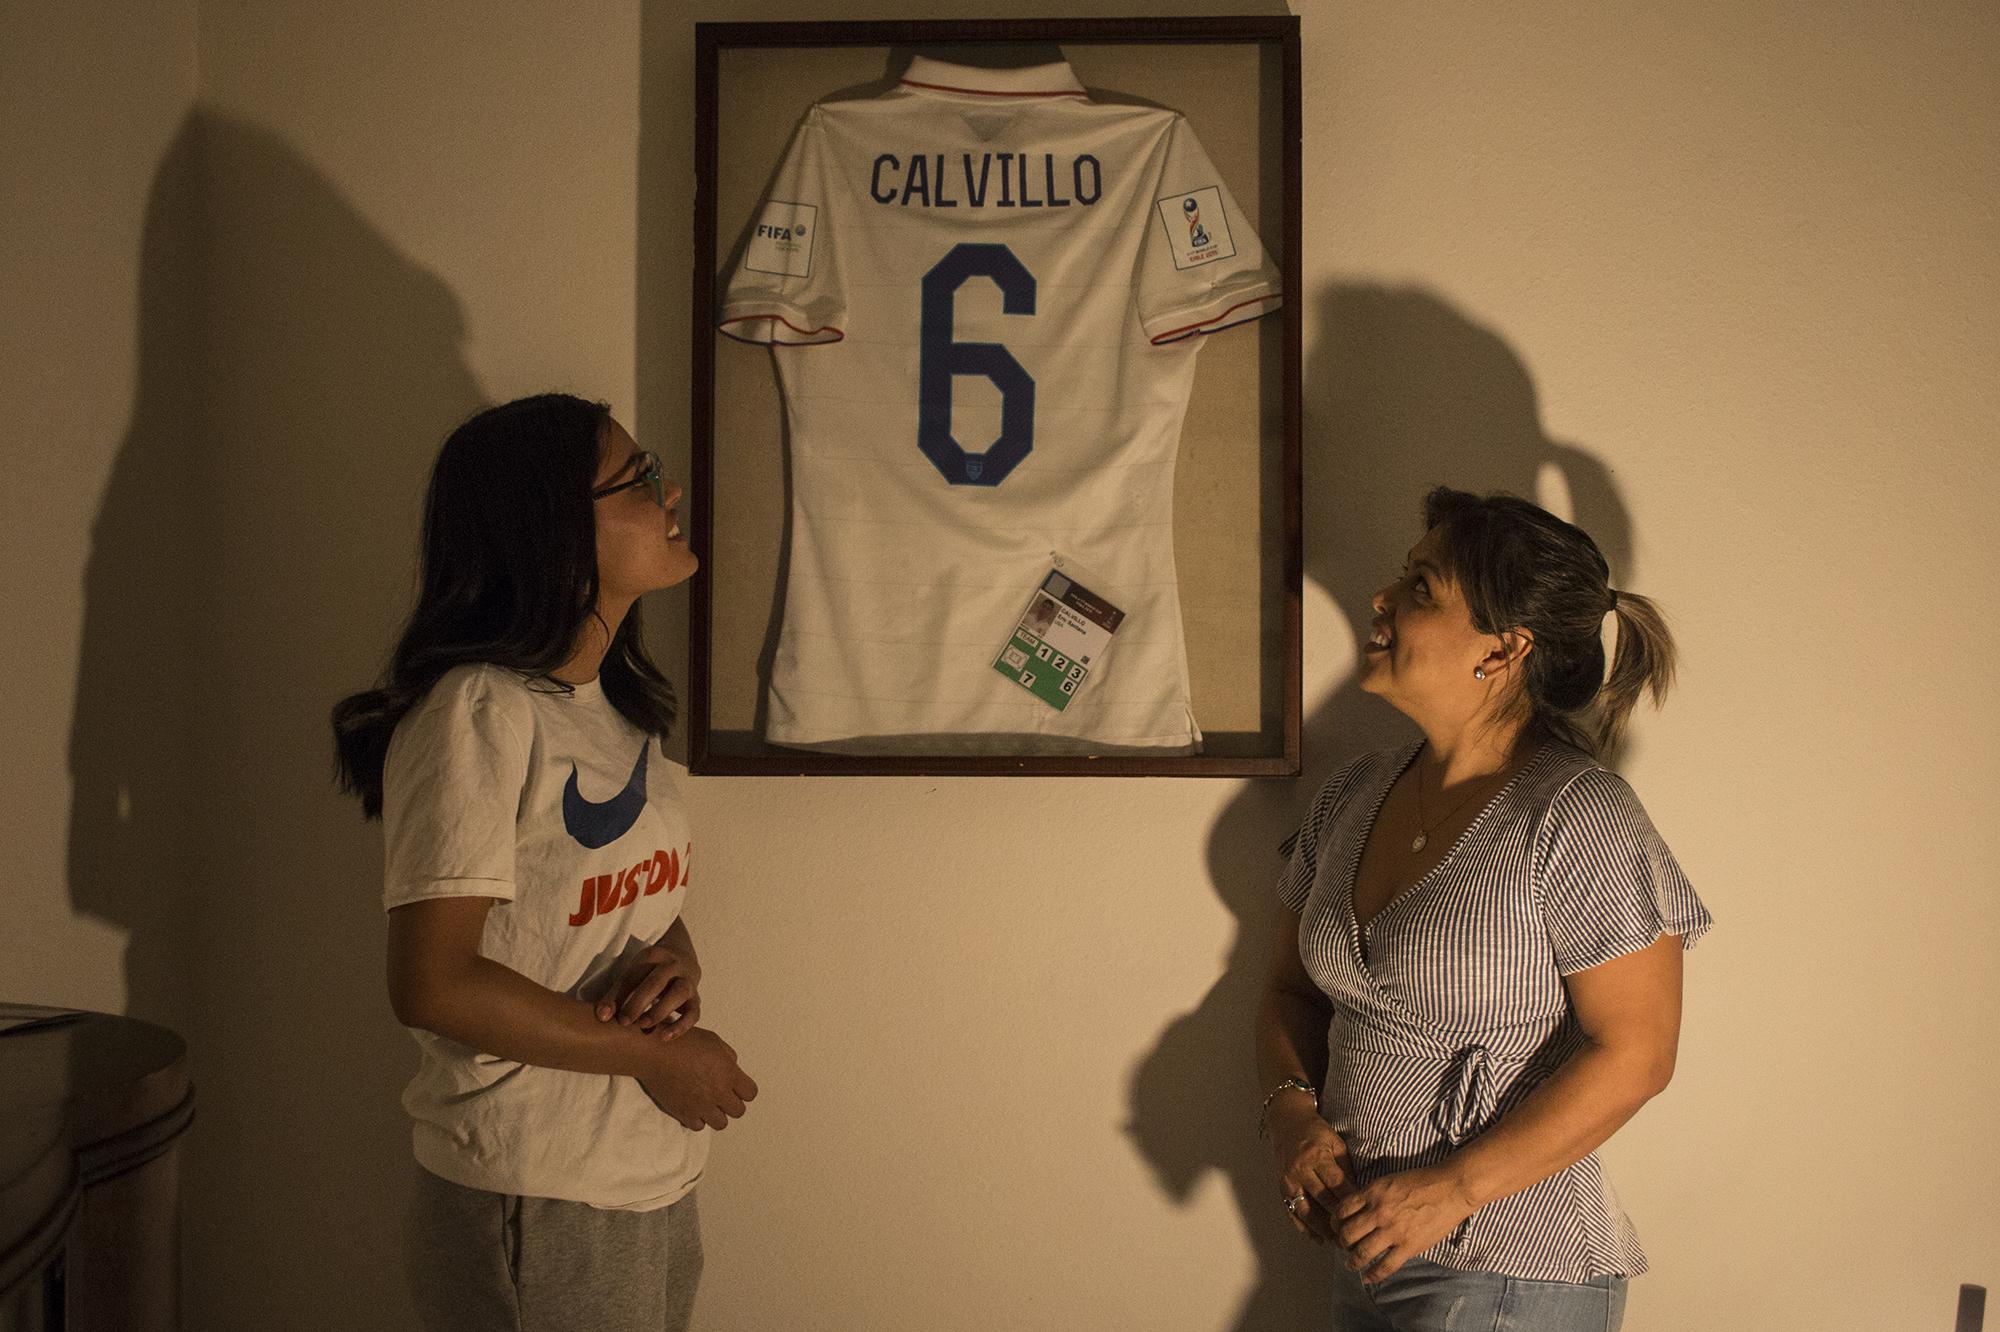 Desireé Calvillo (right) and her daughter Giselle pose near the jersey Eric Calvillo wore to compete in the 2015 youth World Cup with the United States. Calvillo now plays for El Salvador, and his mother hopes to soon frame his new jersey alongside the old in their home in Lancaster, L.A. County, California. Photo: Víctor Peña/El Faro